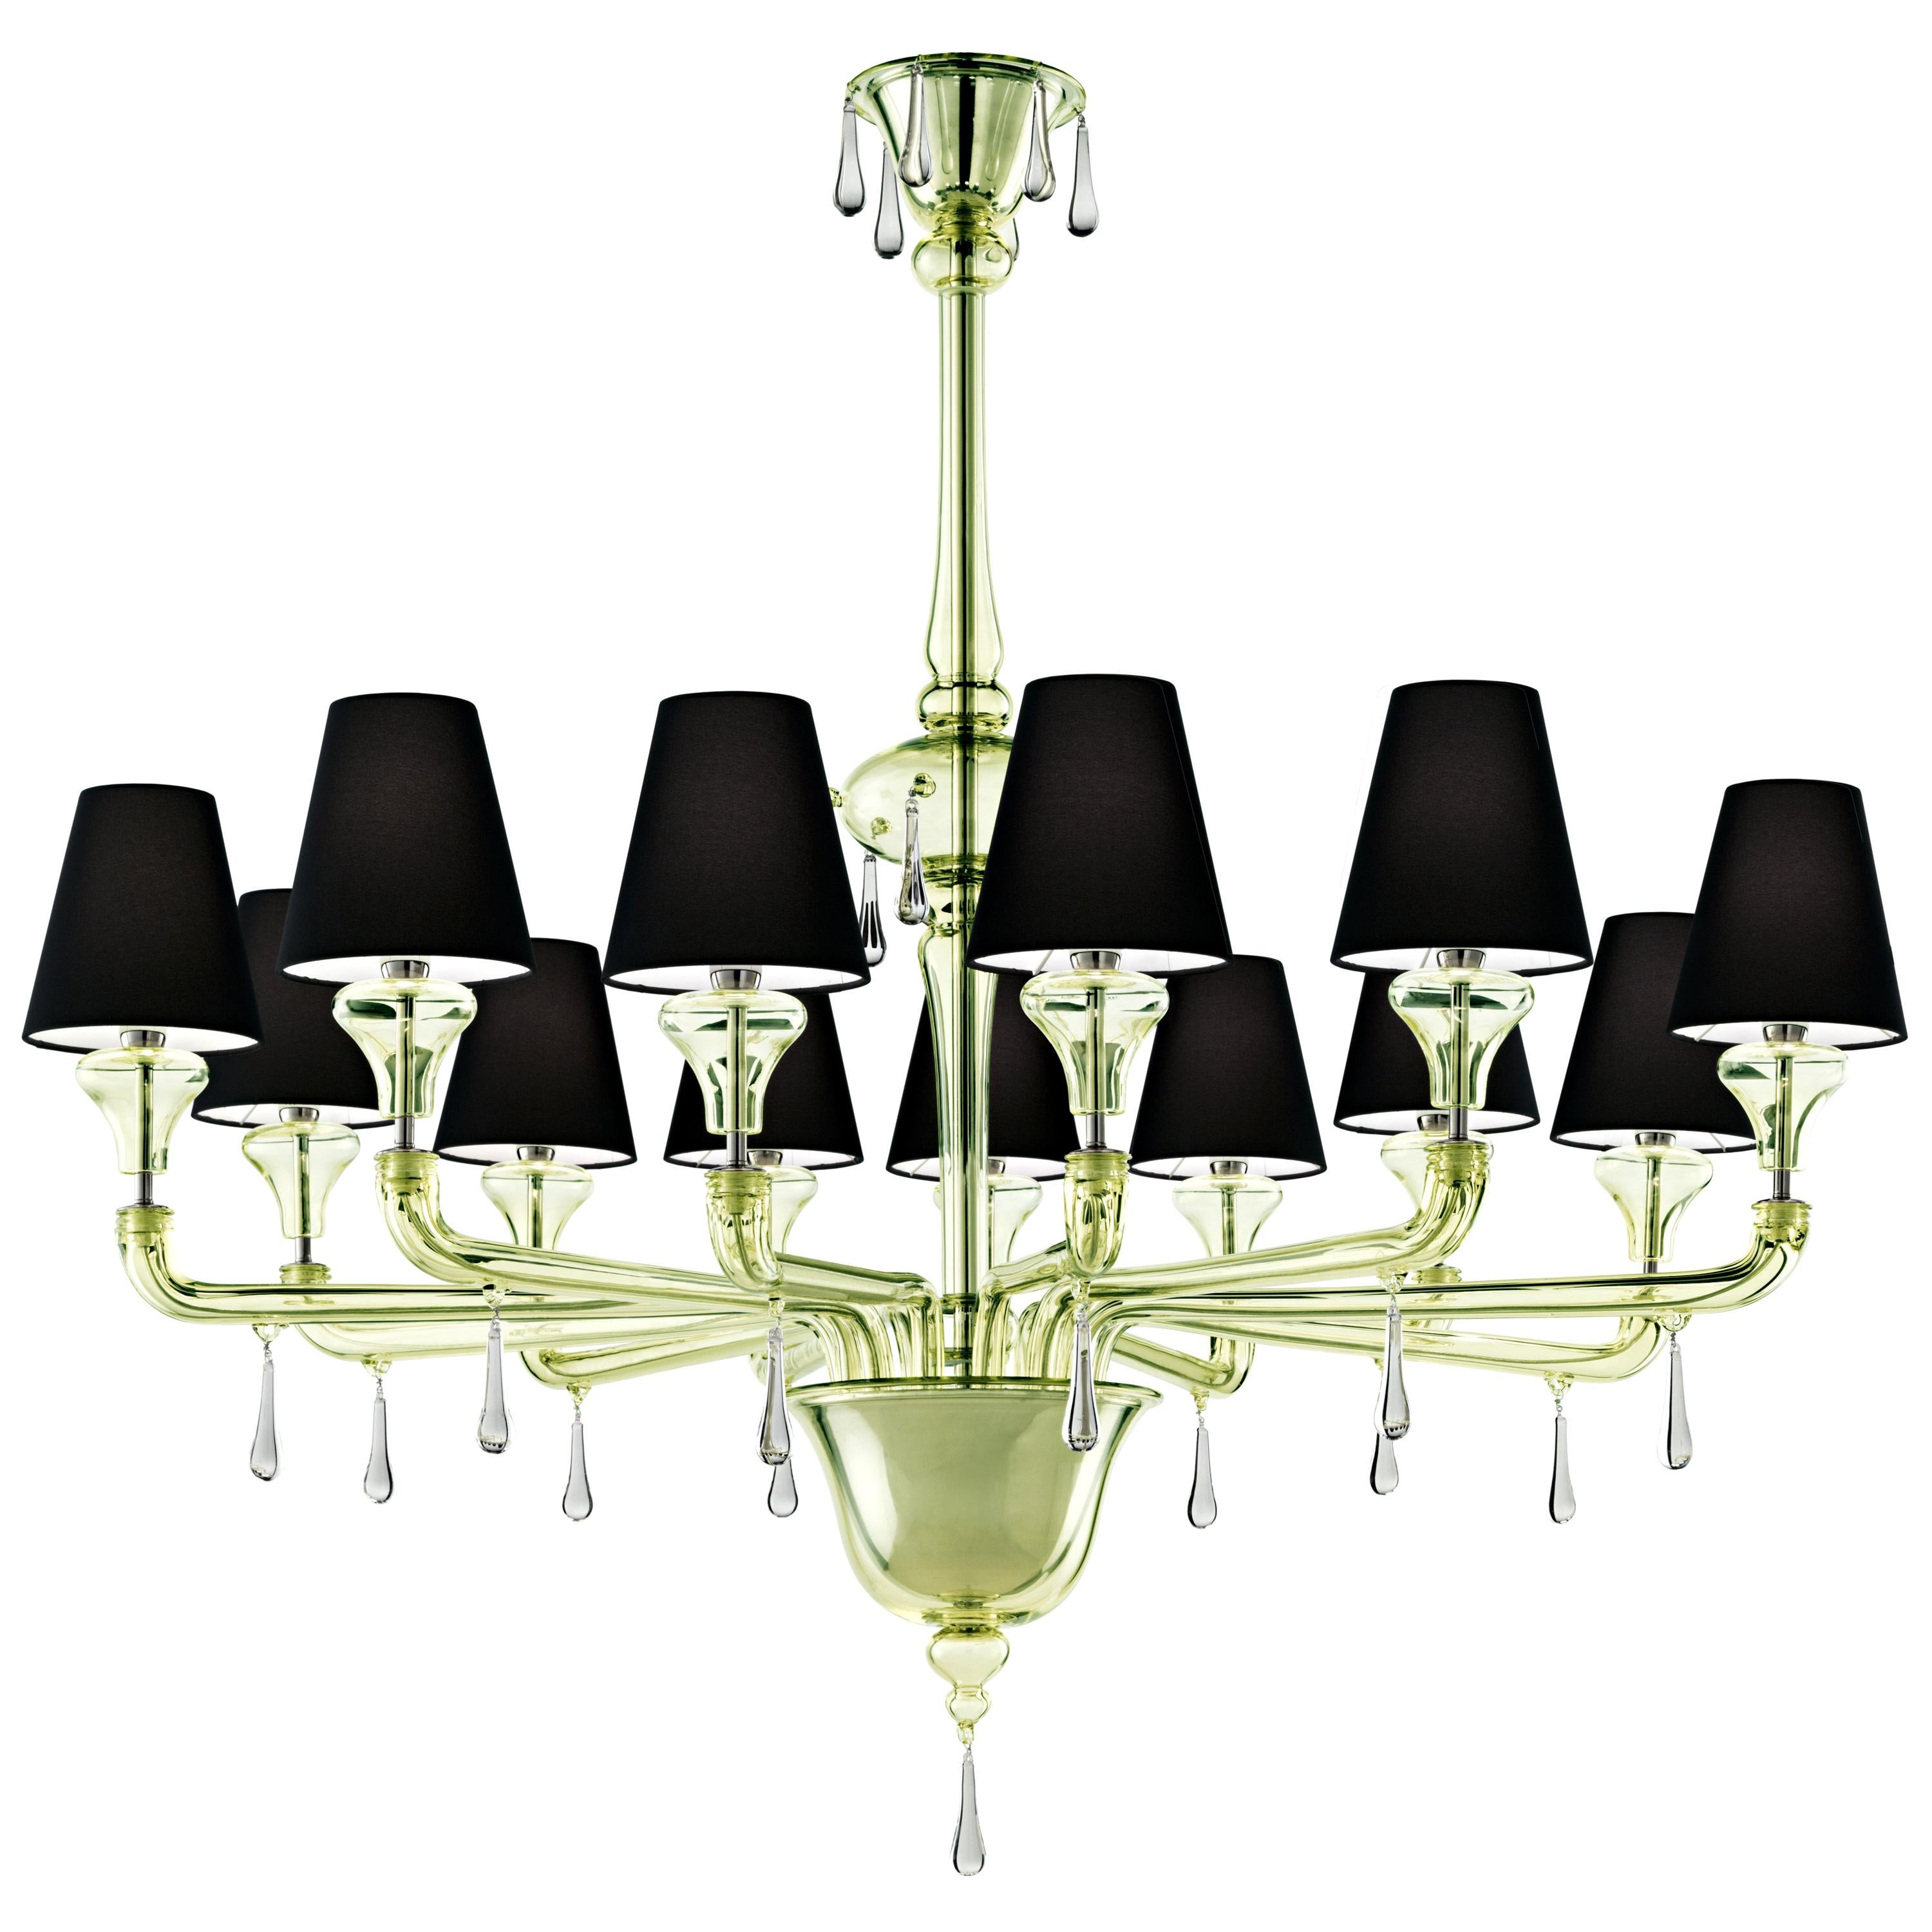 Green (Liquid Citron_EL) Nevada 5549 13 Chandelier in Glass with Black Shade, by Barovier&Toso